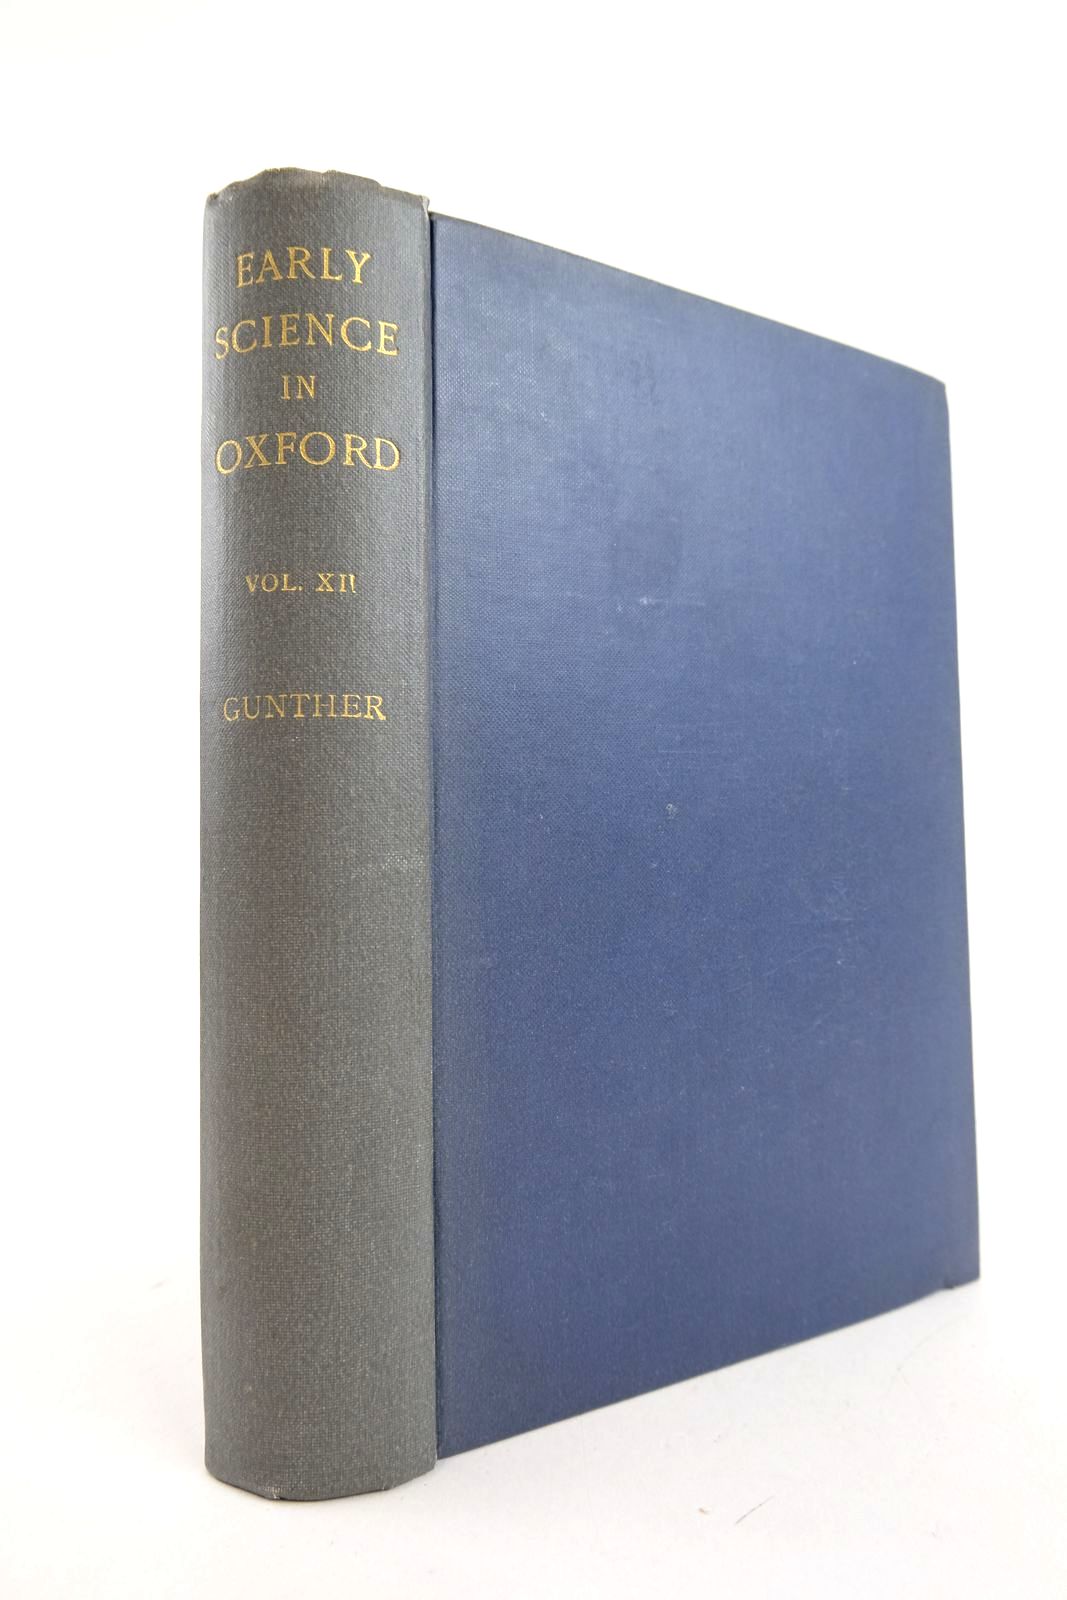 Photo of EARLY SCIENCE IN OXFORD VOL XII- Stock Number: 2133146